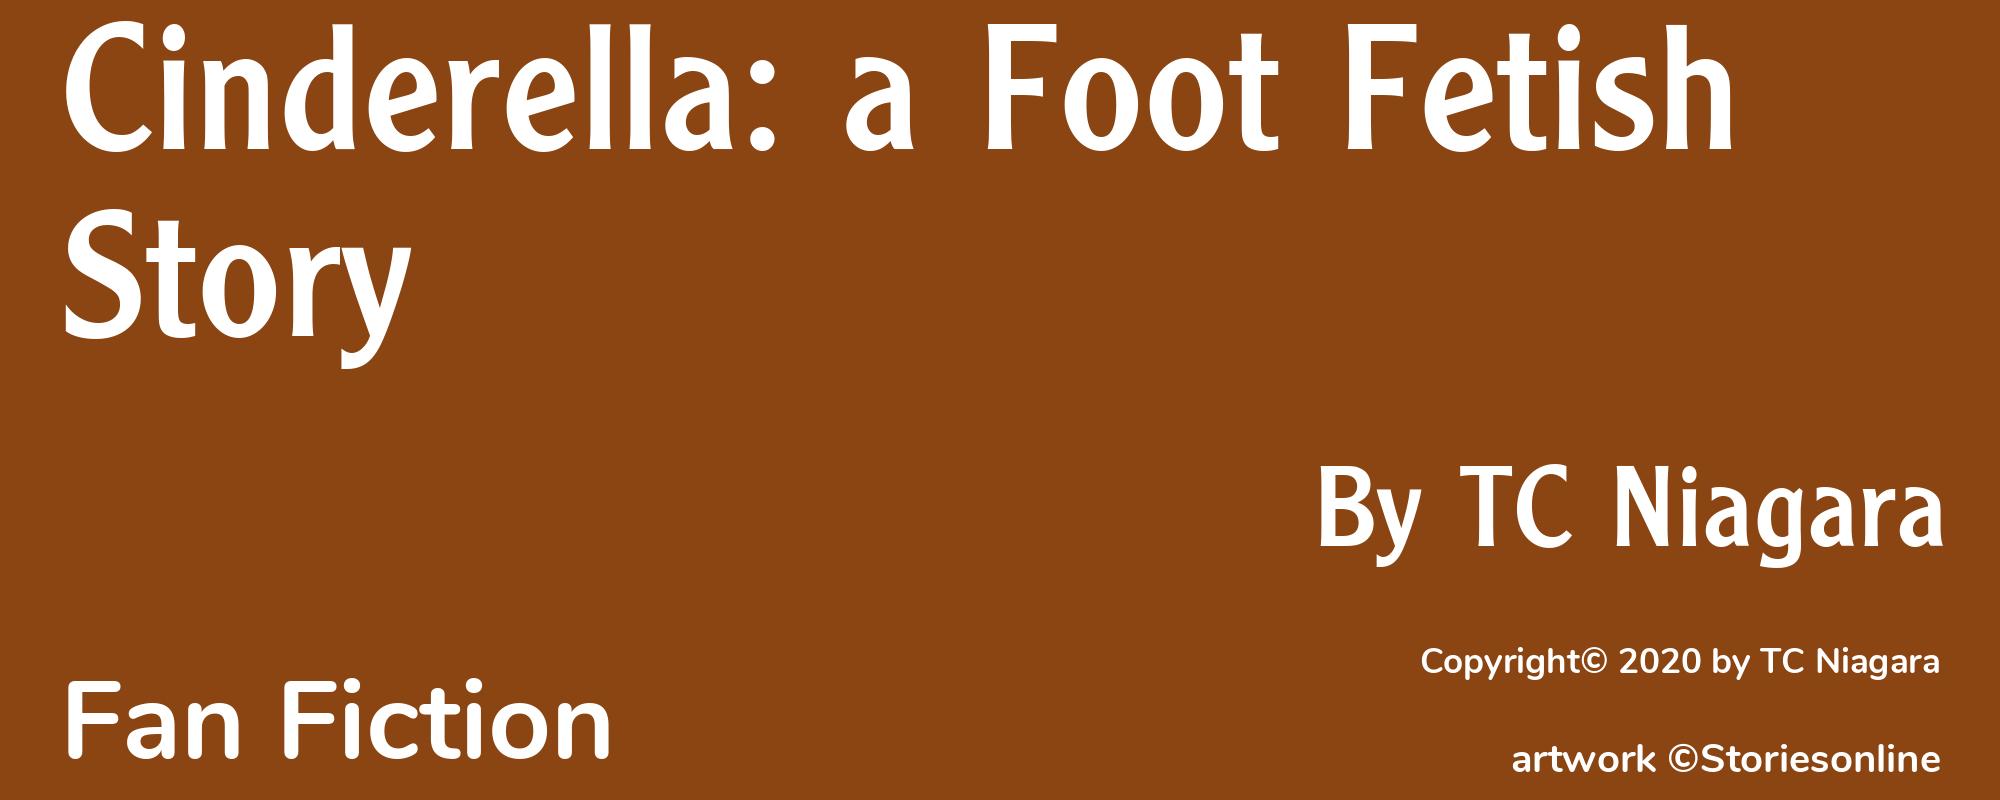 Cinderella: a Foot Fetish Story - Cover